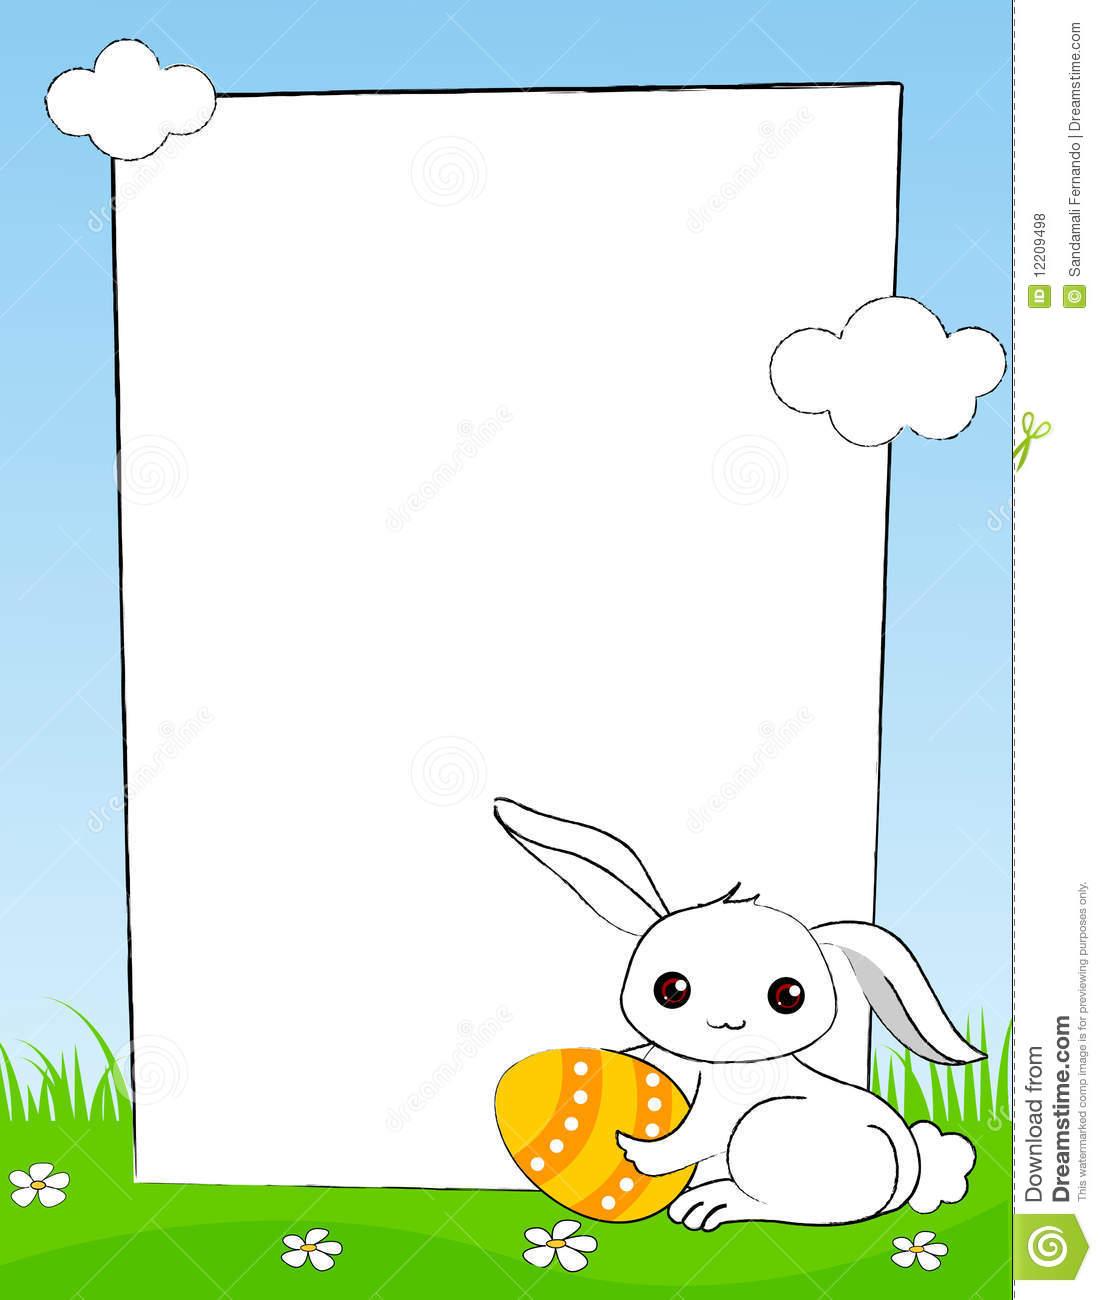 Cute Little Easter Bunny With A Painted Easter Egg On Cloudy Blue Sky    